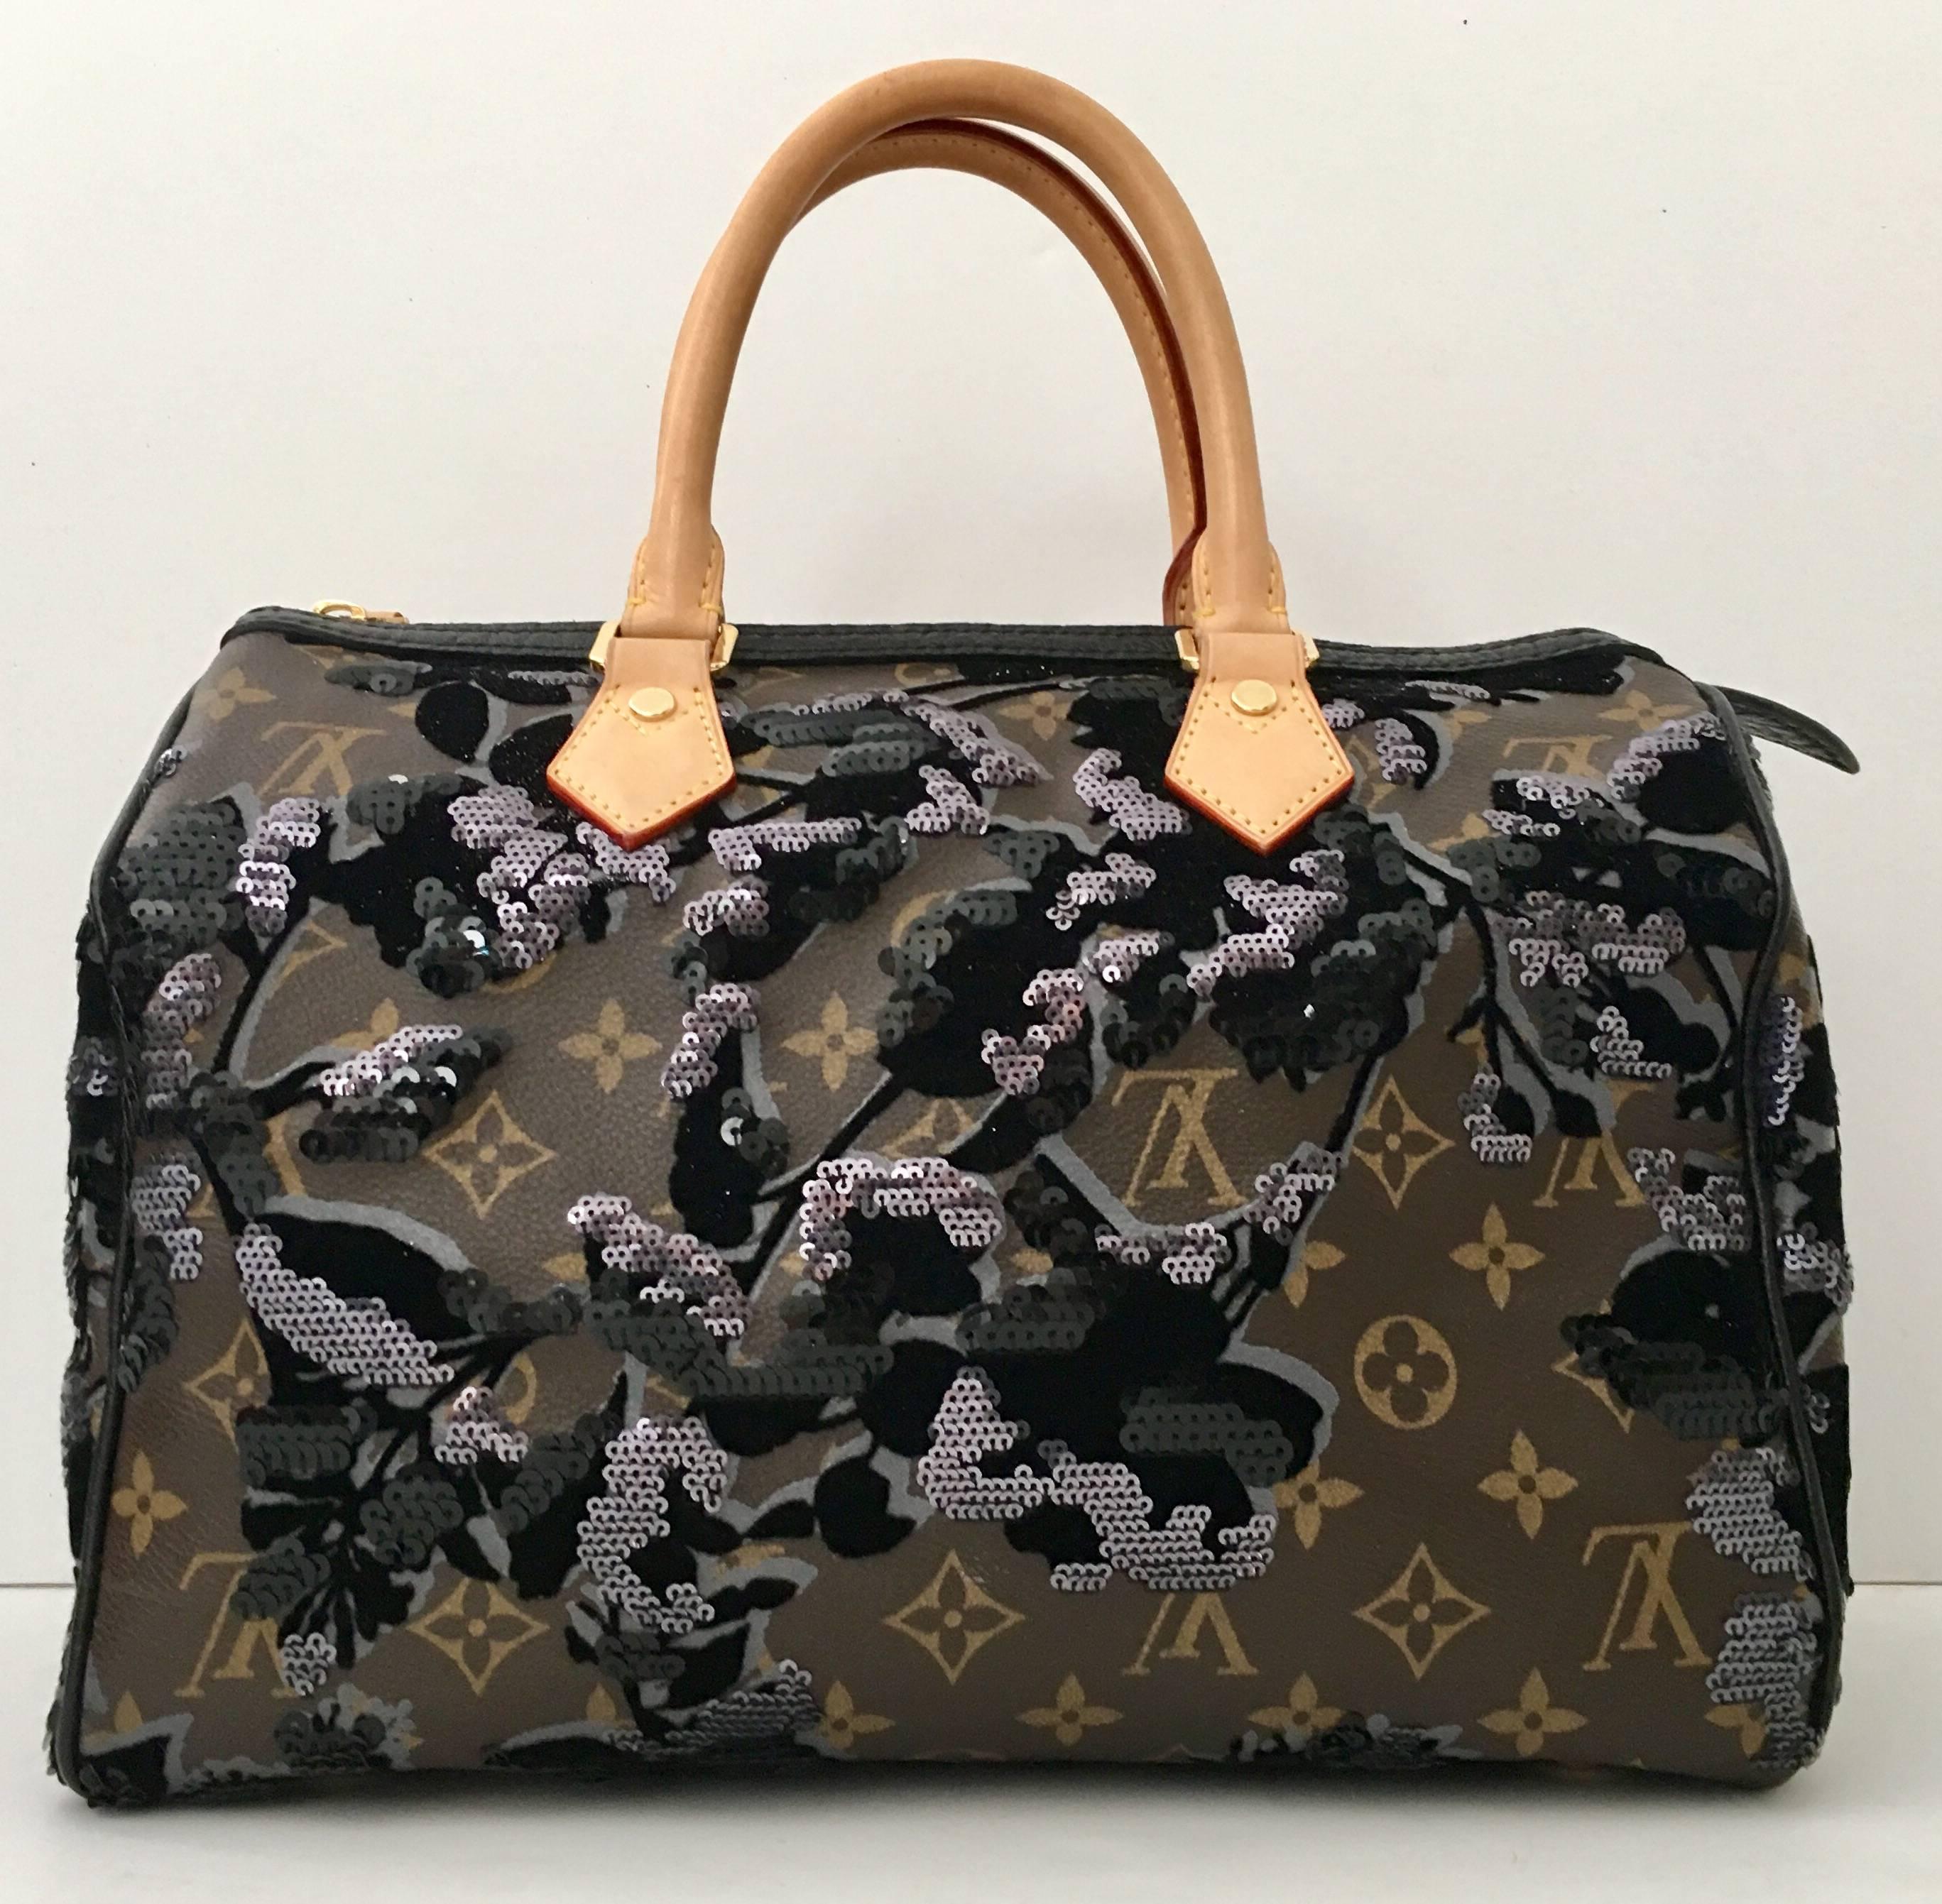  Louis Vuitton 2010-New Collectors Limited edition Monogram" Fleur De Jais" Speedy 35 handbag. Crafted from brown monogram coated canvas, this top handle bag satchel features a beautiful, ornate floral pattern with shimmering black and